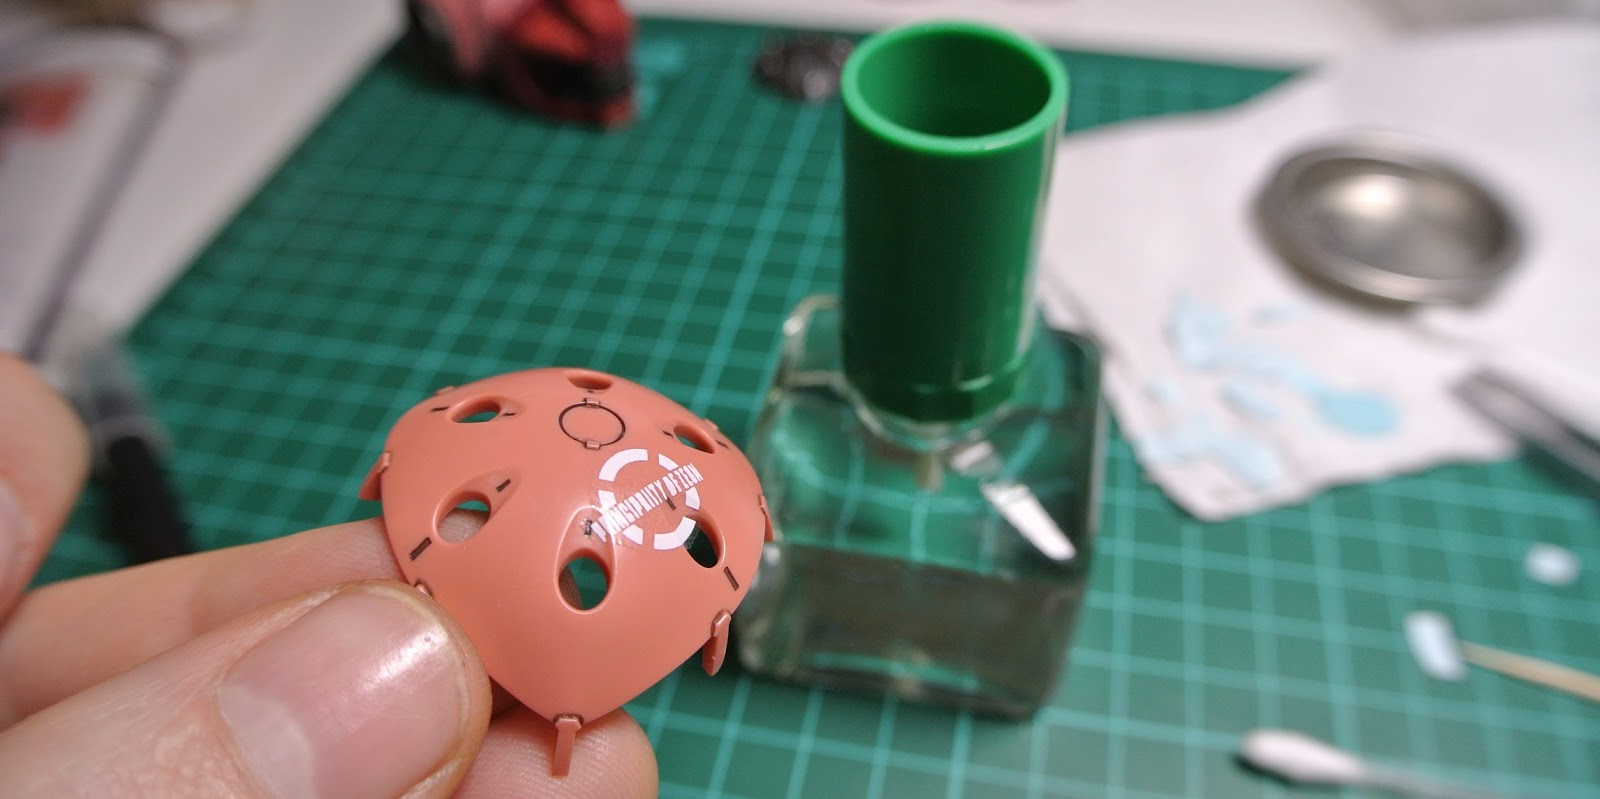 Tutorial: How to Apply Waterslide Decals on Model Kits using Mr. Mark Setter  and Softer 